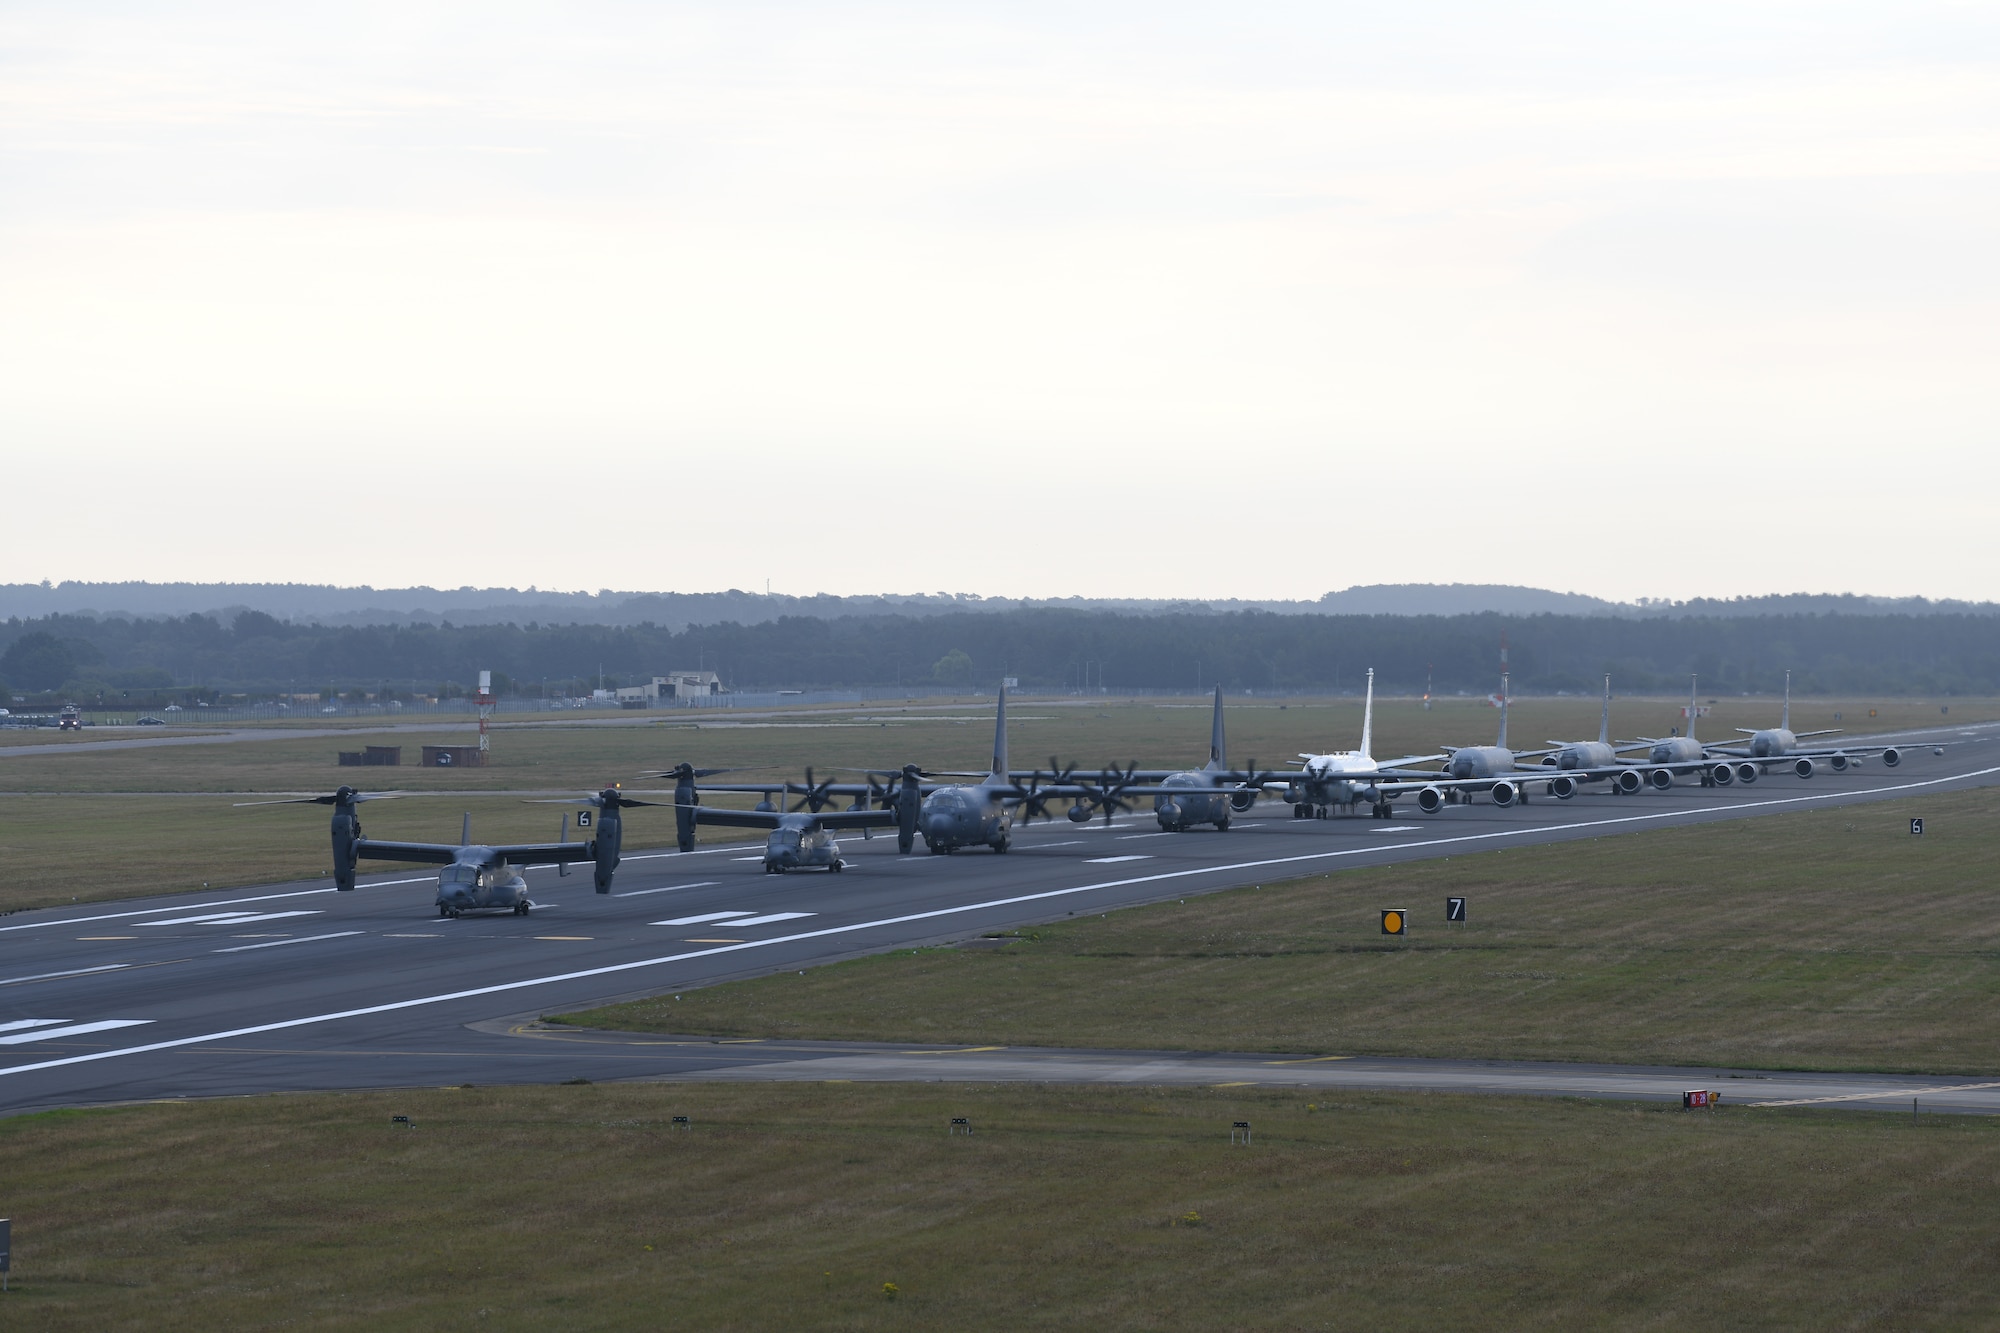 Team Mildenhall aircraft participate in an “elephant walk” at Royal Air Force Mildenhall Sept. 13, 2021. An elephant walk is a term used by the U.S. Air Force when multiple aircraft taxi together before takeoff. (U.S. Air Force photo by Senior Airman Antonia Herrera)